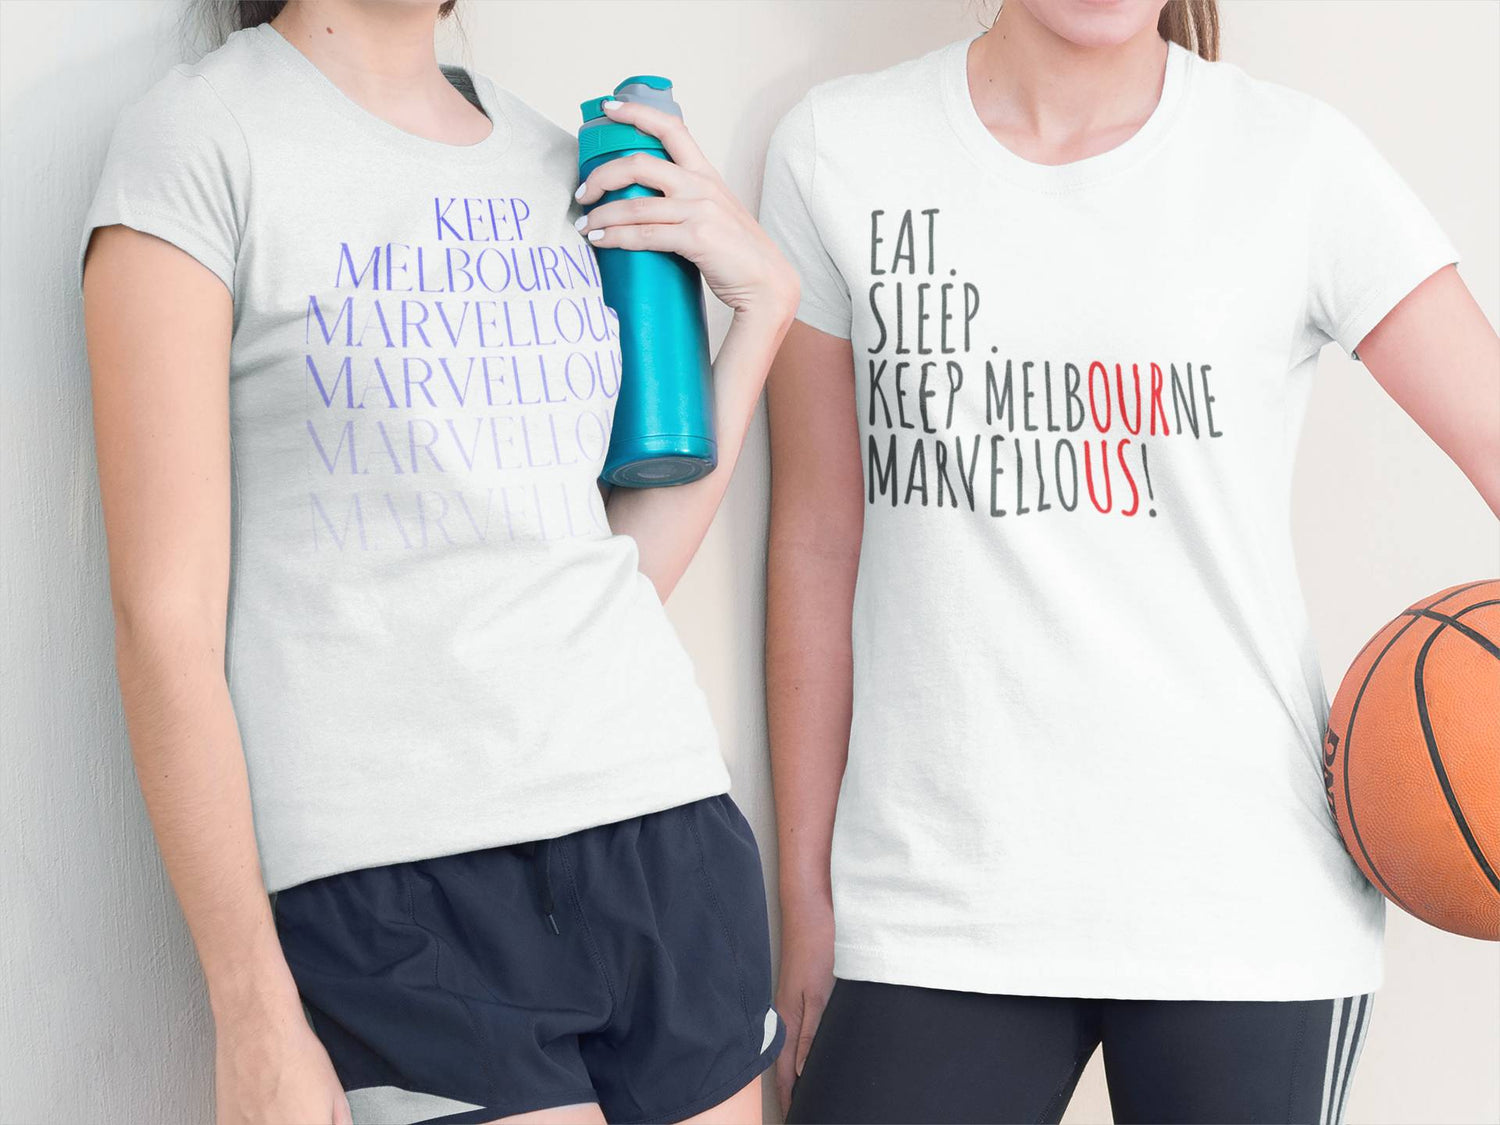 Two ladies in sports clothes in Keep Melbourne Marvellous T-shirts, one says "Keep Melbourne Marvellous!" in cool text, the other "Eat, sleep, Keep Melbourne Marvellous!"